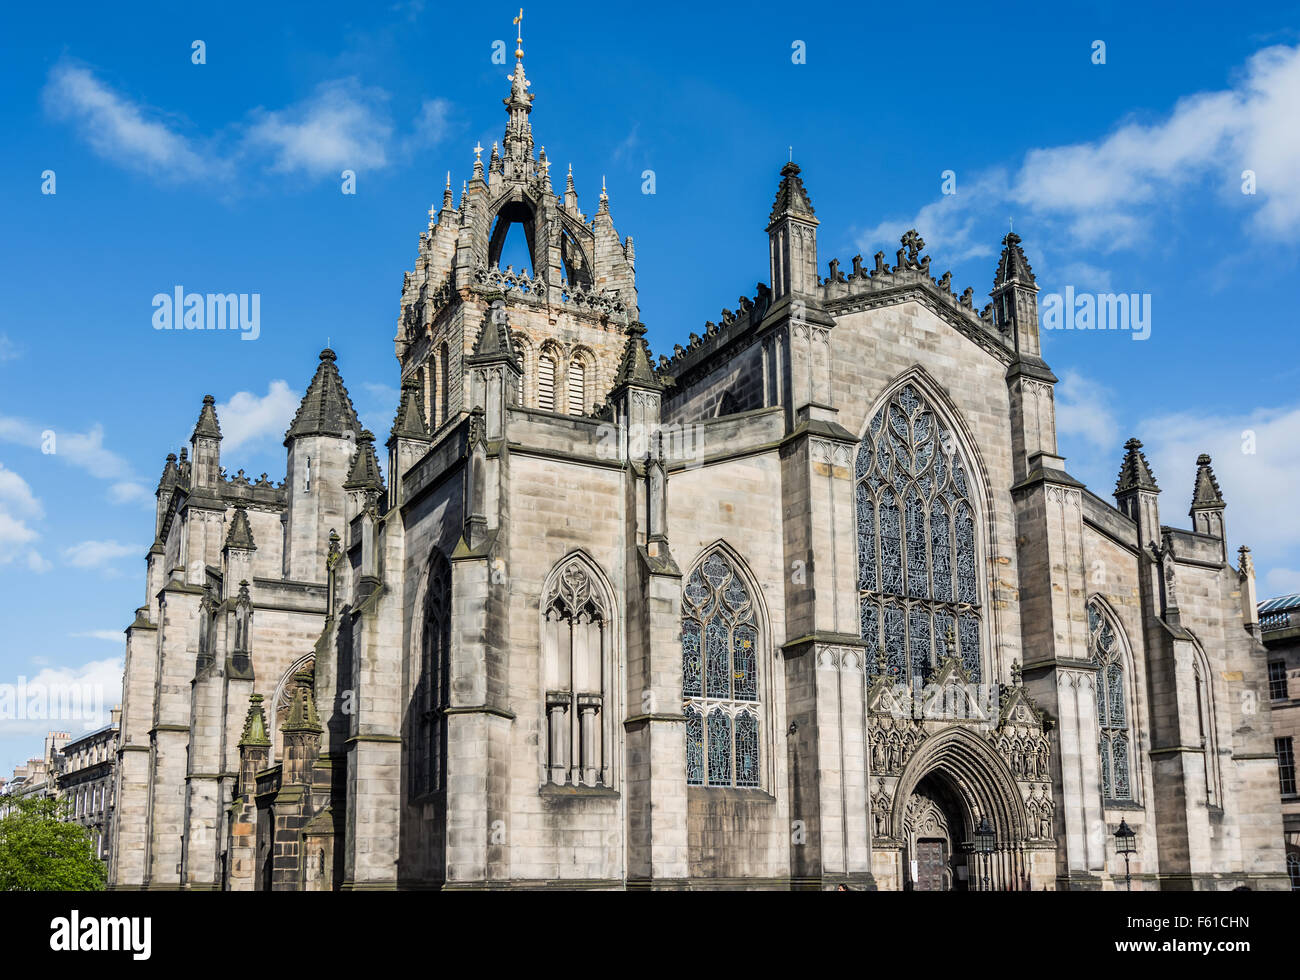 St Giles' Cathedral, more properly termed the High Kirk of Edinburgh, is the principal place of worship of the Church of Scotlan Stock Photo